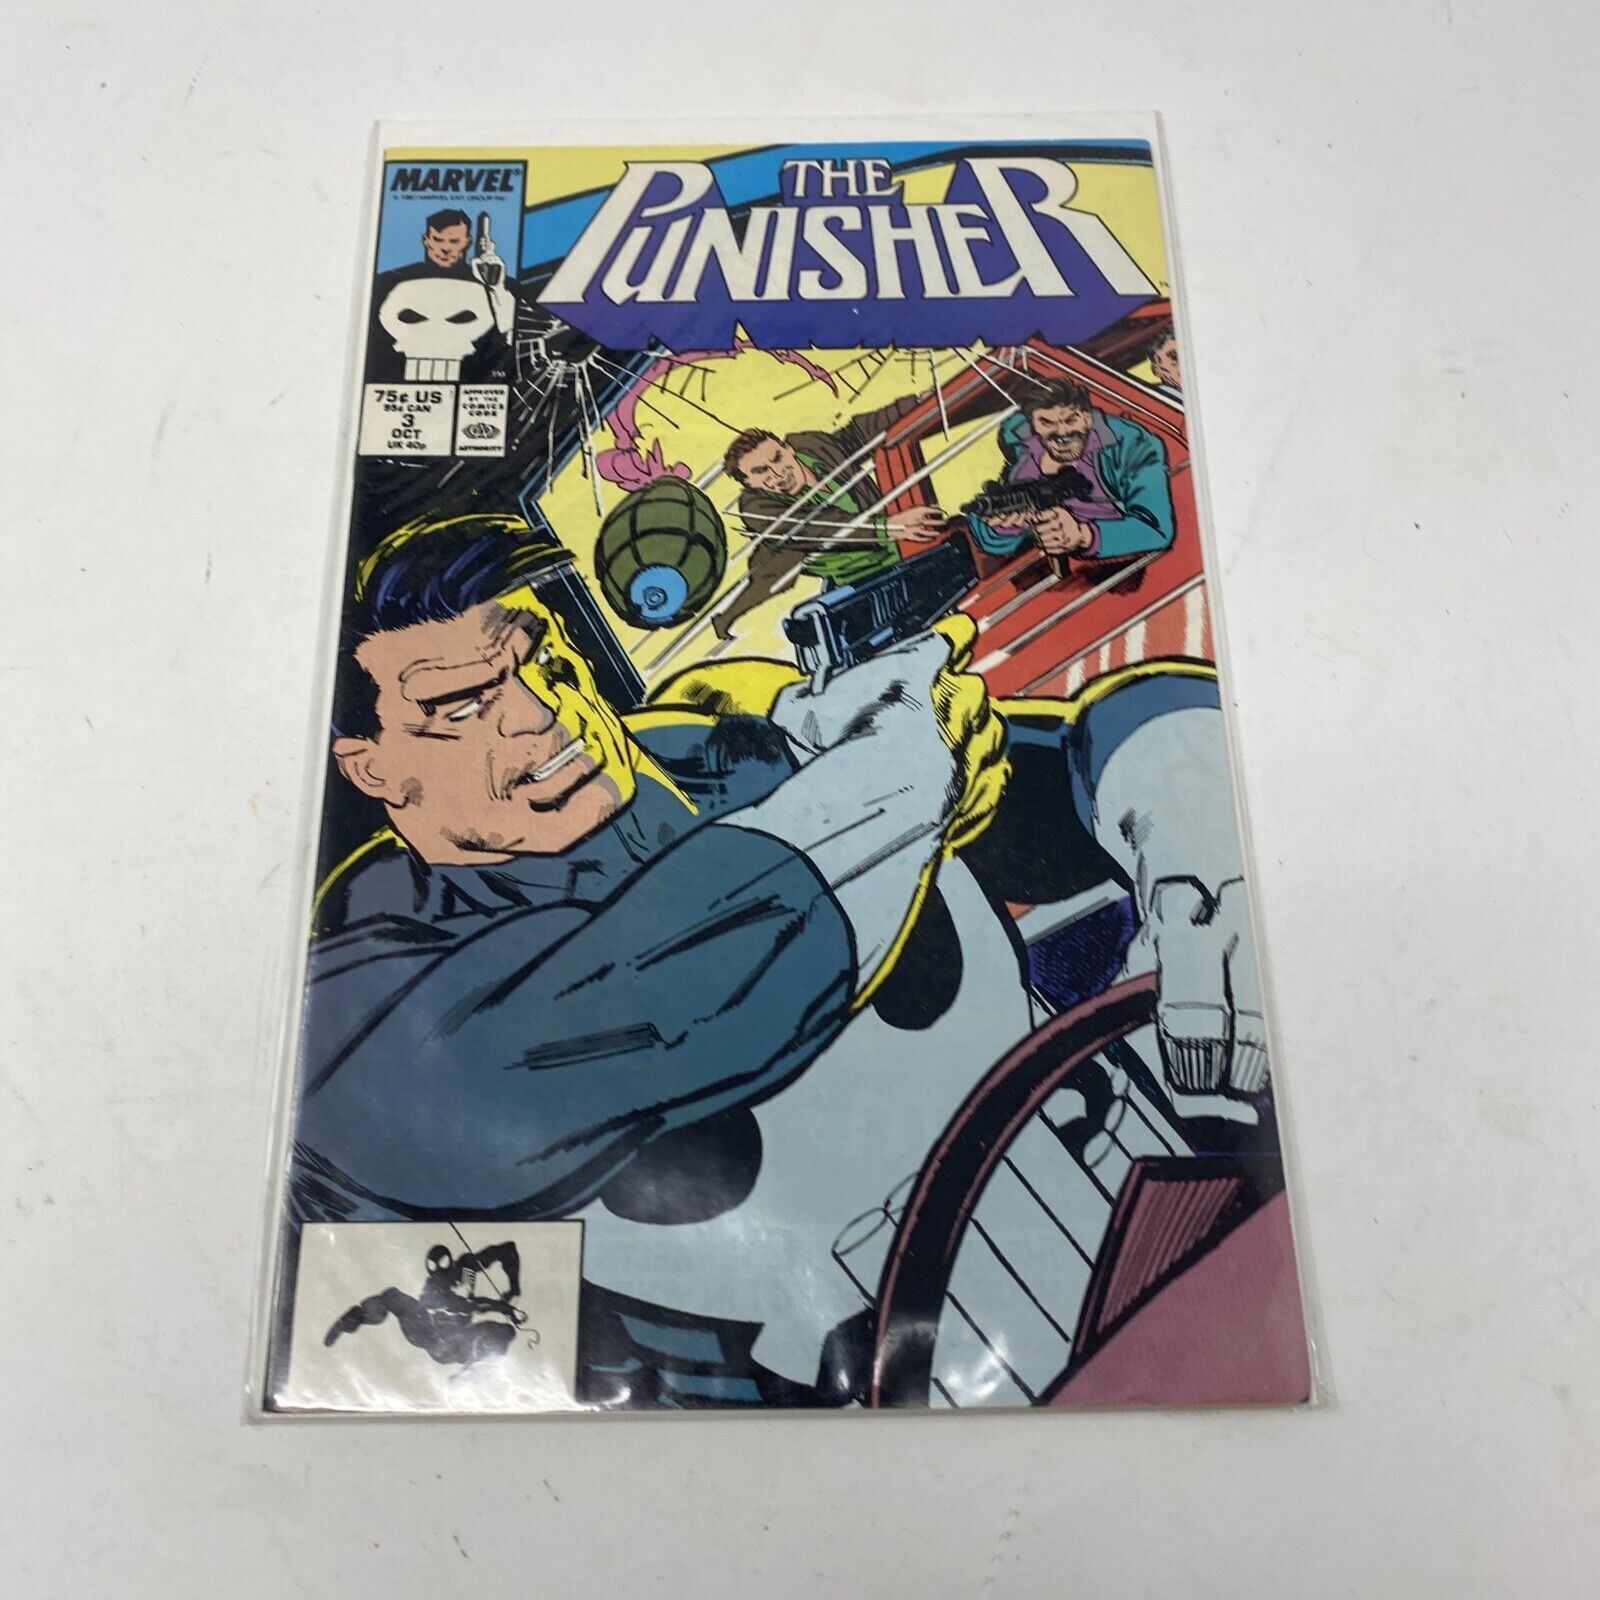 The Punisher #3 (1987) Marvel VF+ Comic Book